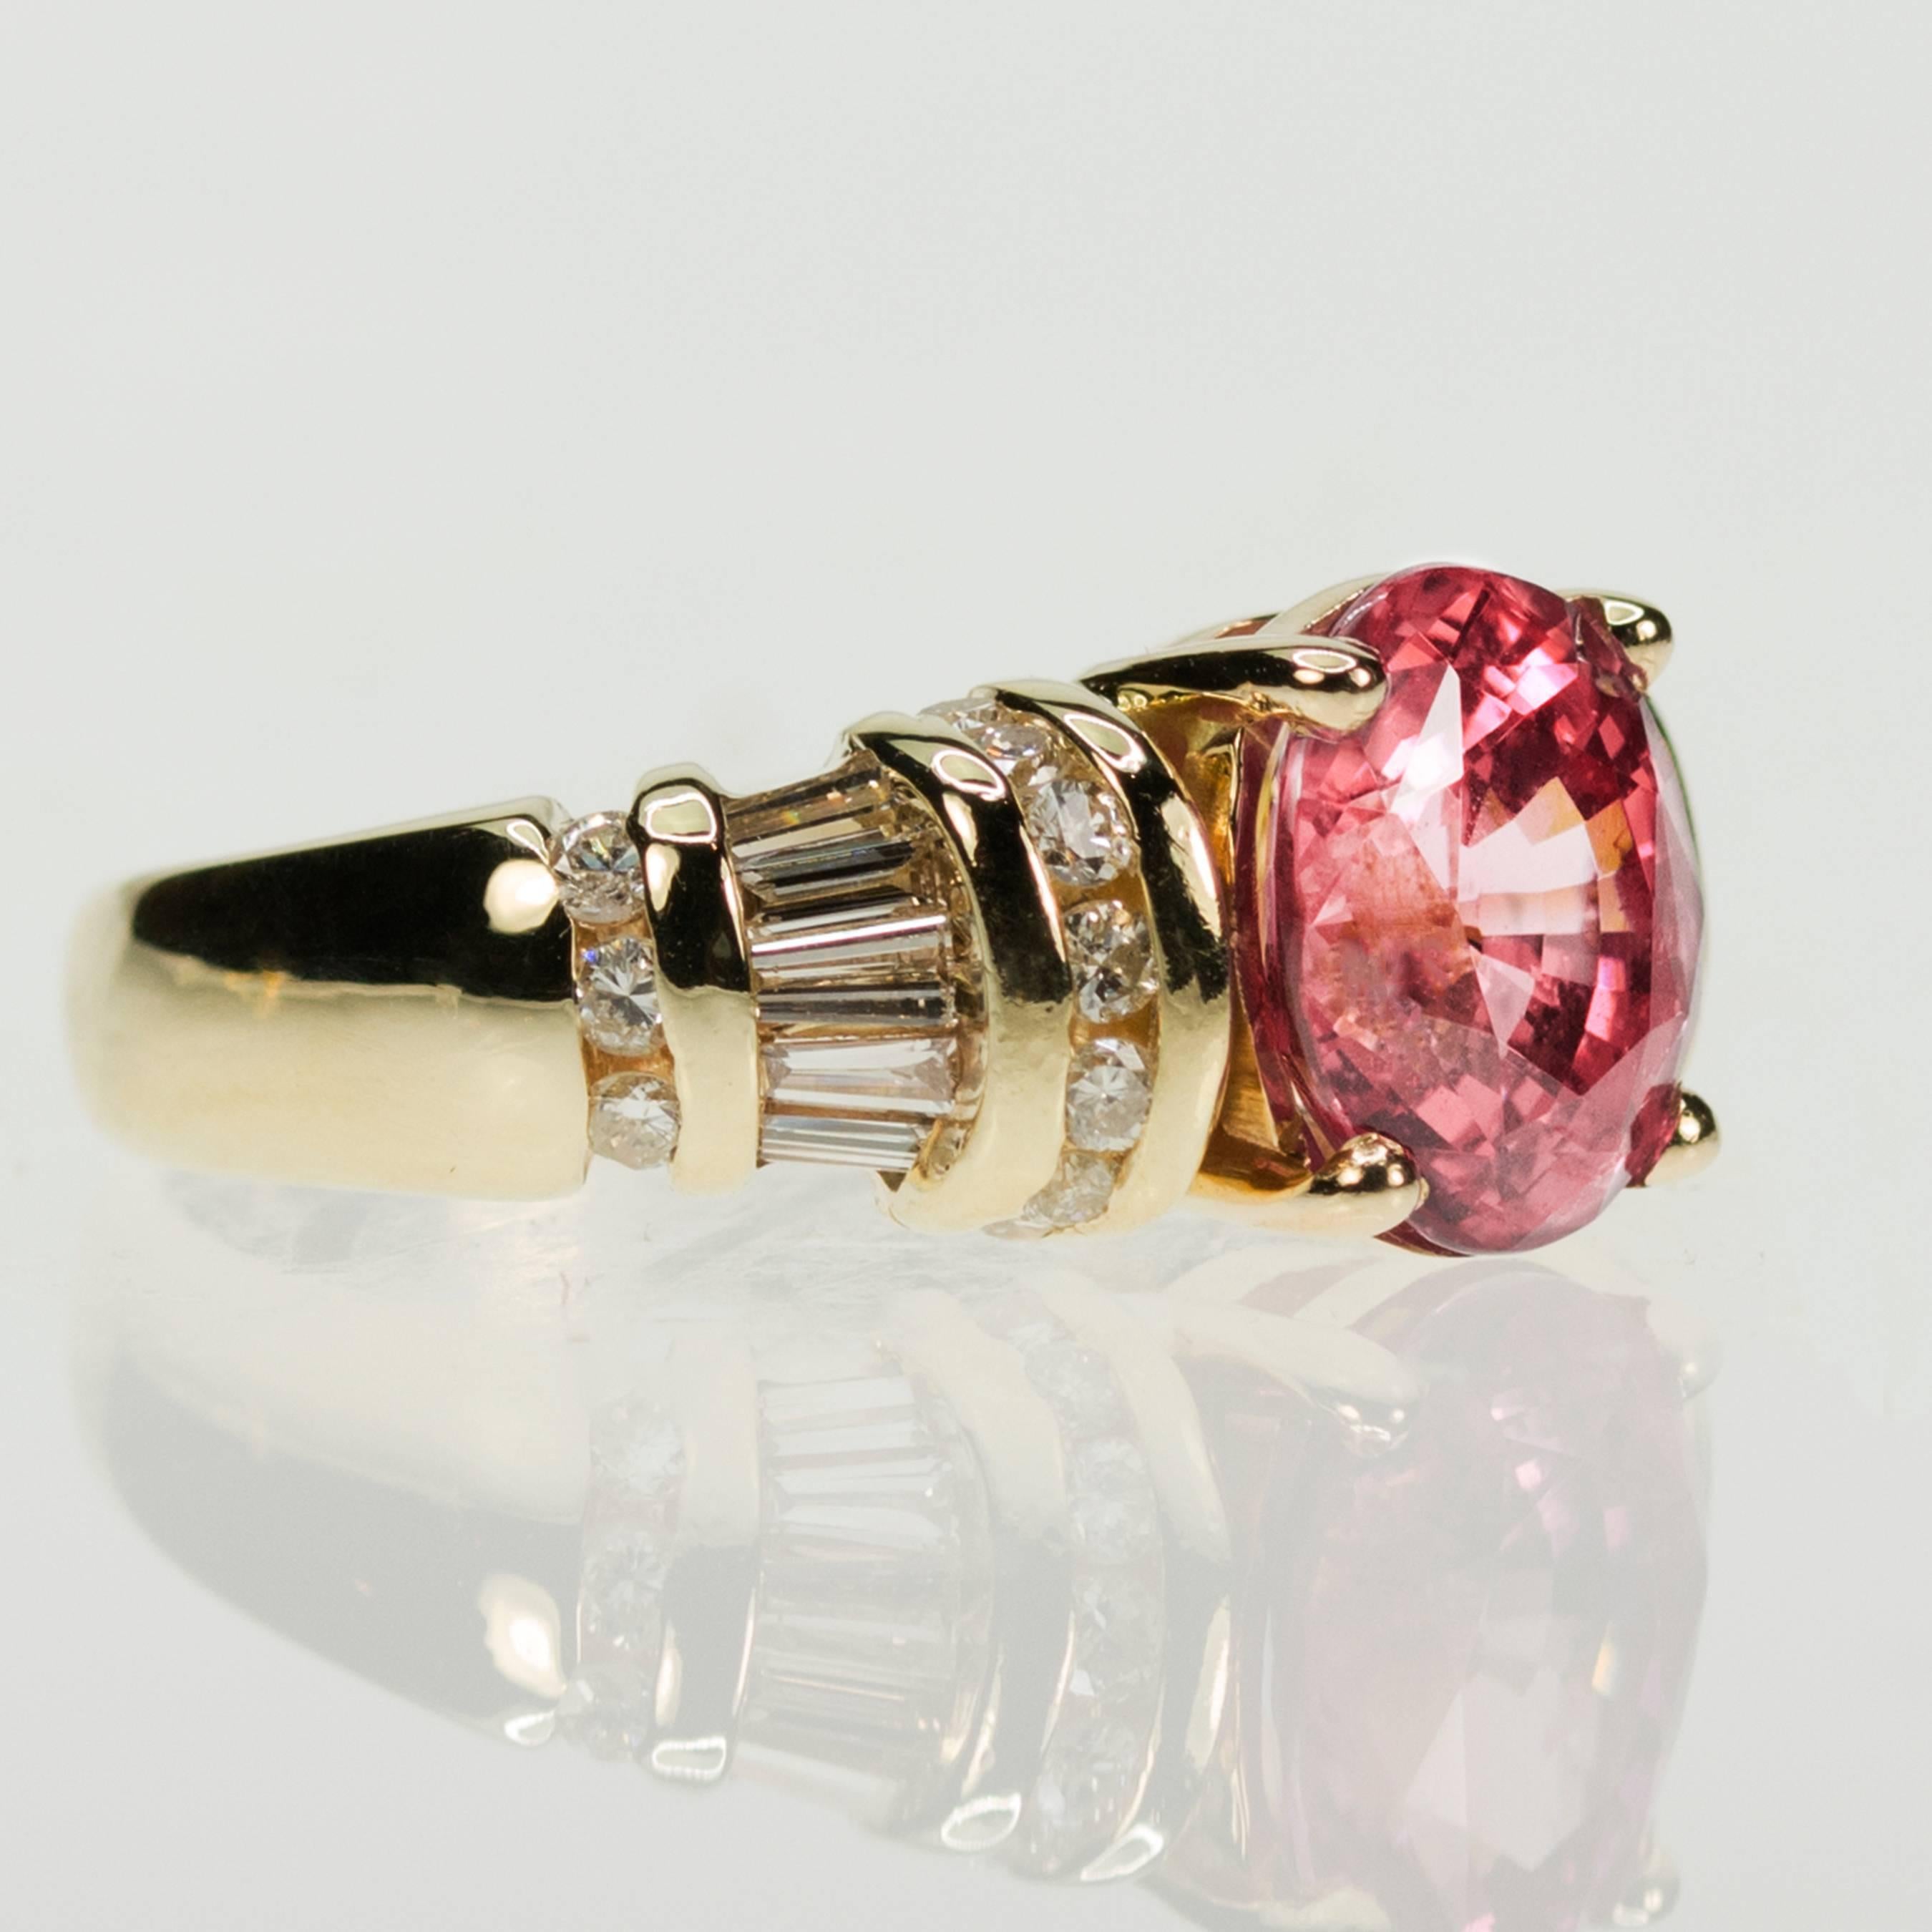 Yellow Gold Ring with AGL certified 3.01 carat Ceylon pink sapphire and approximately 0.75 carats of round brilliant and baguette diamonds..